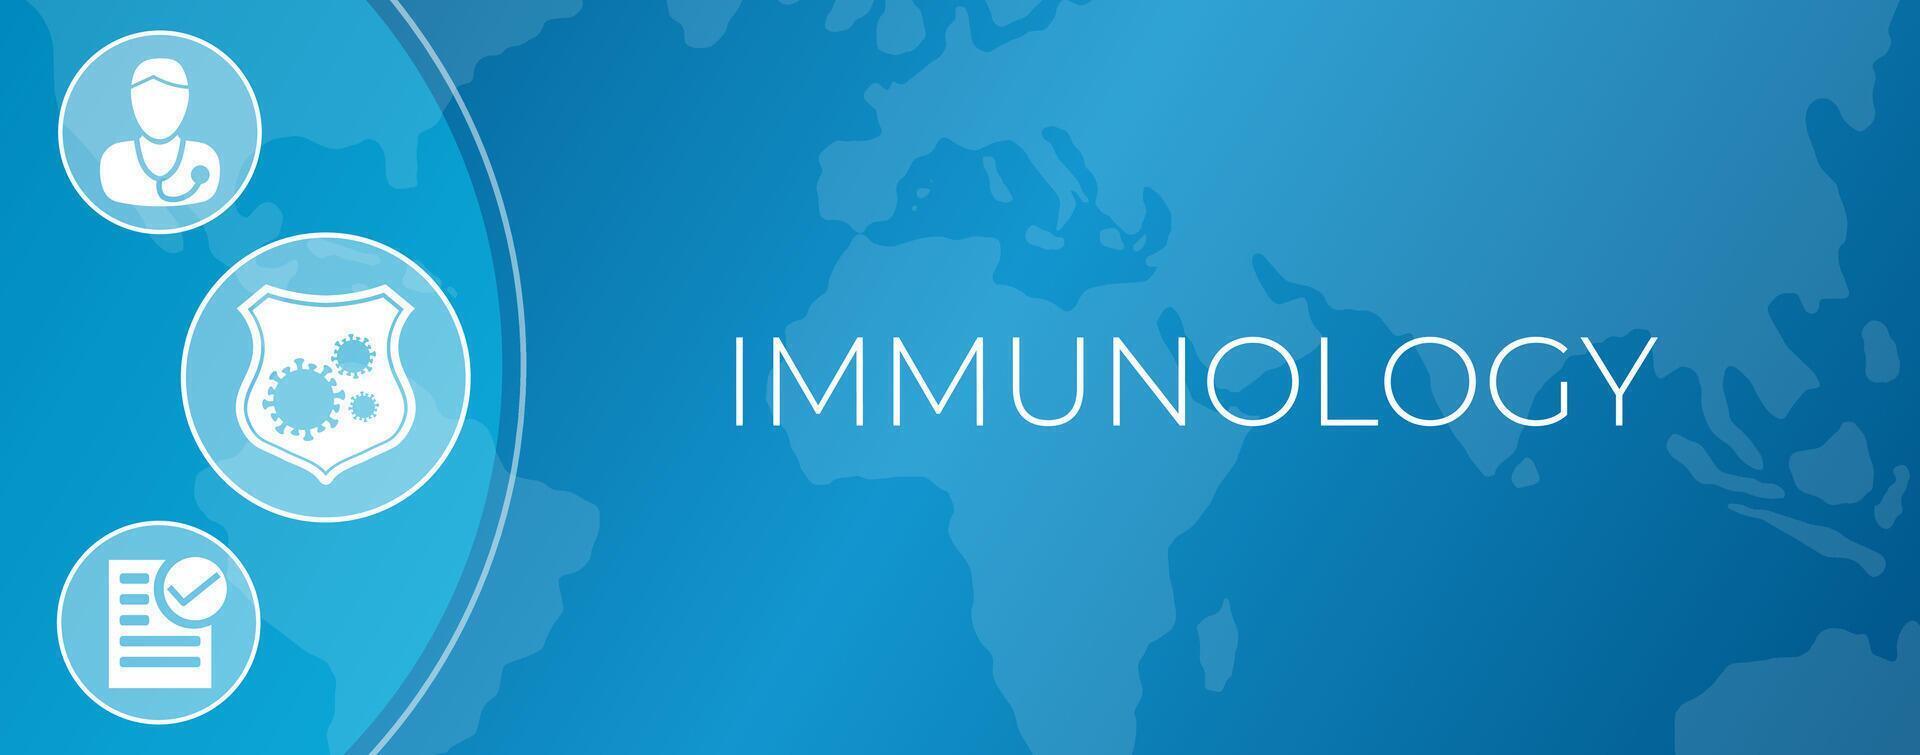 Blue Immunology Illustration Background Banner with Icons vector